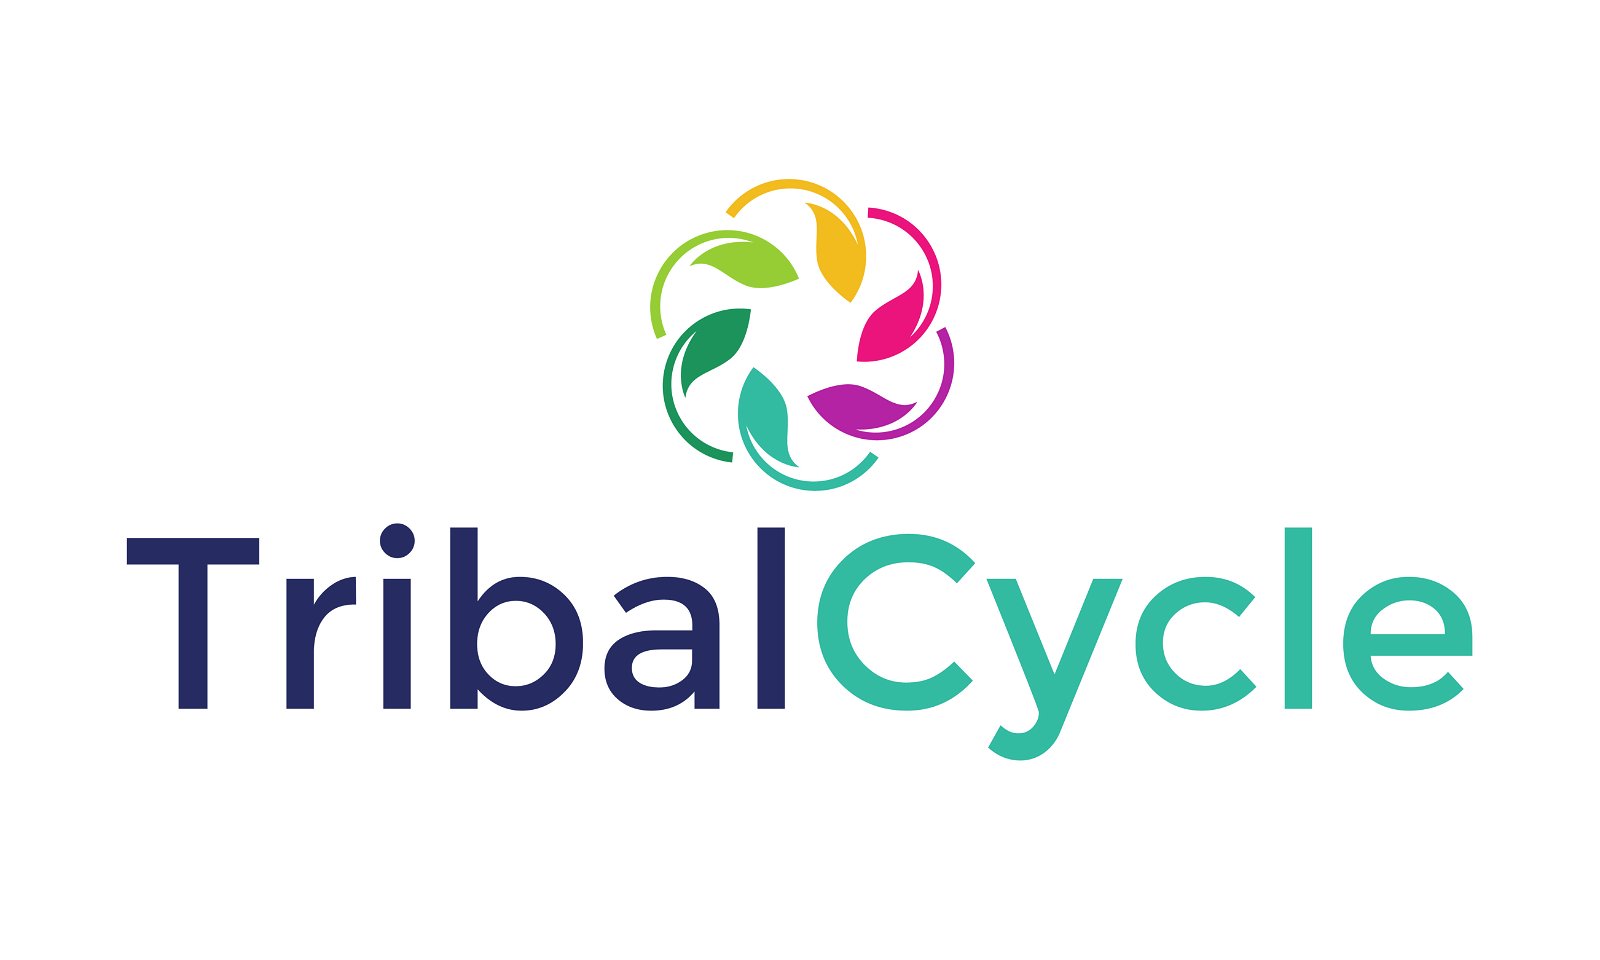 TribalCycle.com - Creative brandable domain for sale